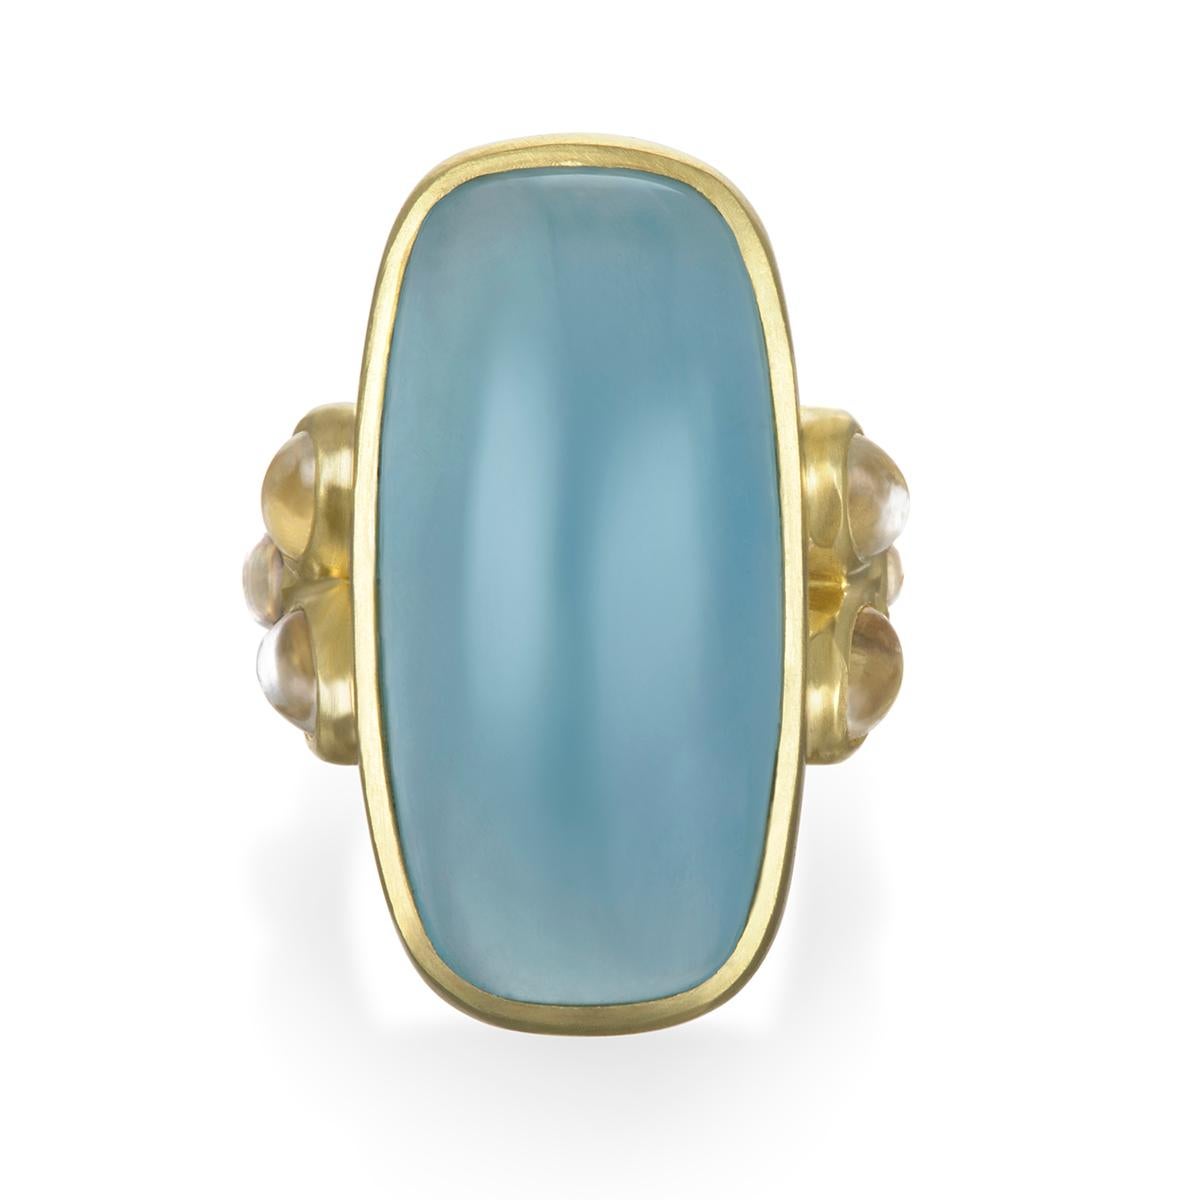 Faye Kim's signature 18k gold setting is perfect for this oversized milky Aquamarine cabochon coming in at over 32 carats.  Flanked with triple oval moonstones give it a breath of lightness and iridescence.  A beautiful and modern look that is great